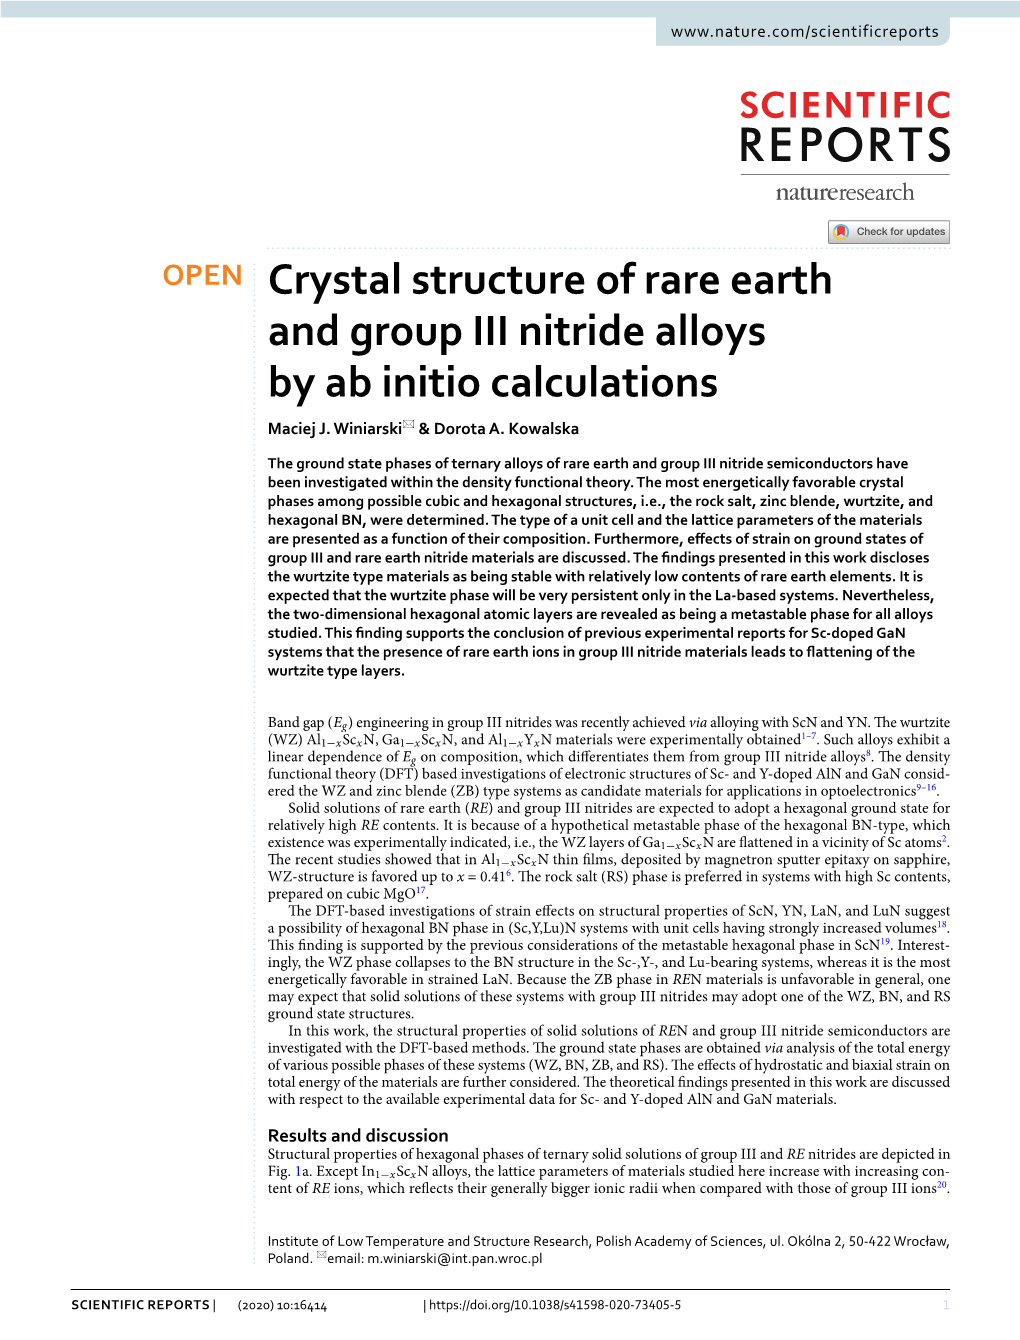 Crystal Structure of Rare Earth and Group III Nitride Alloys by Ab Initio Calculations Maciej J